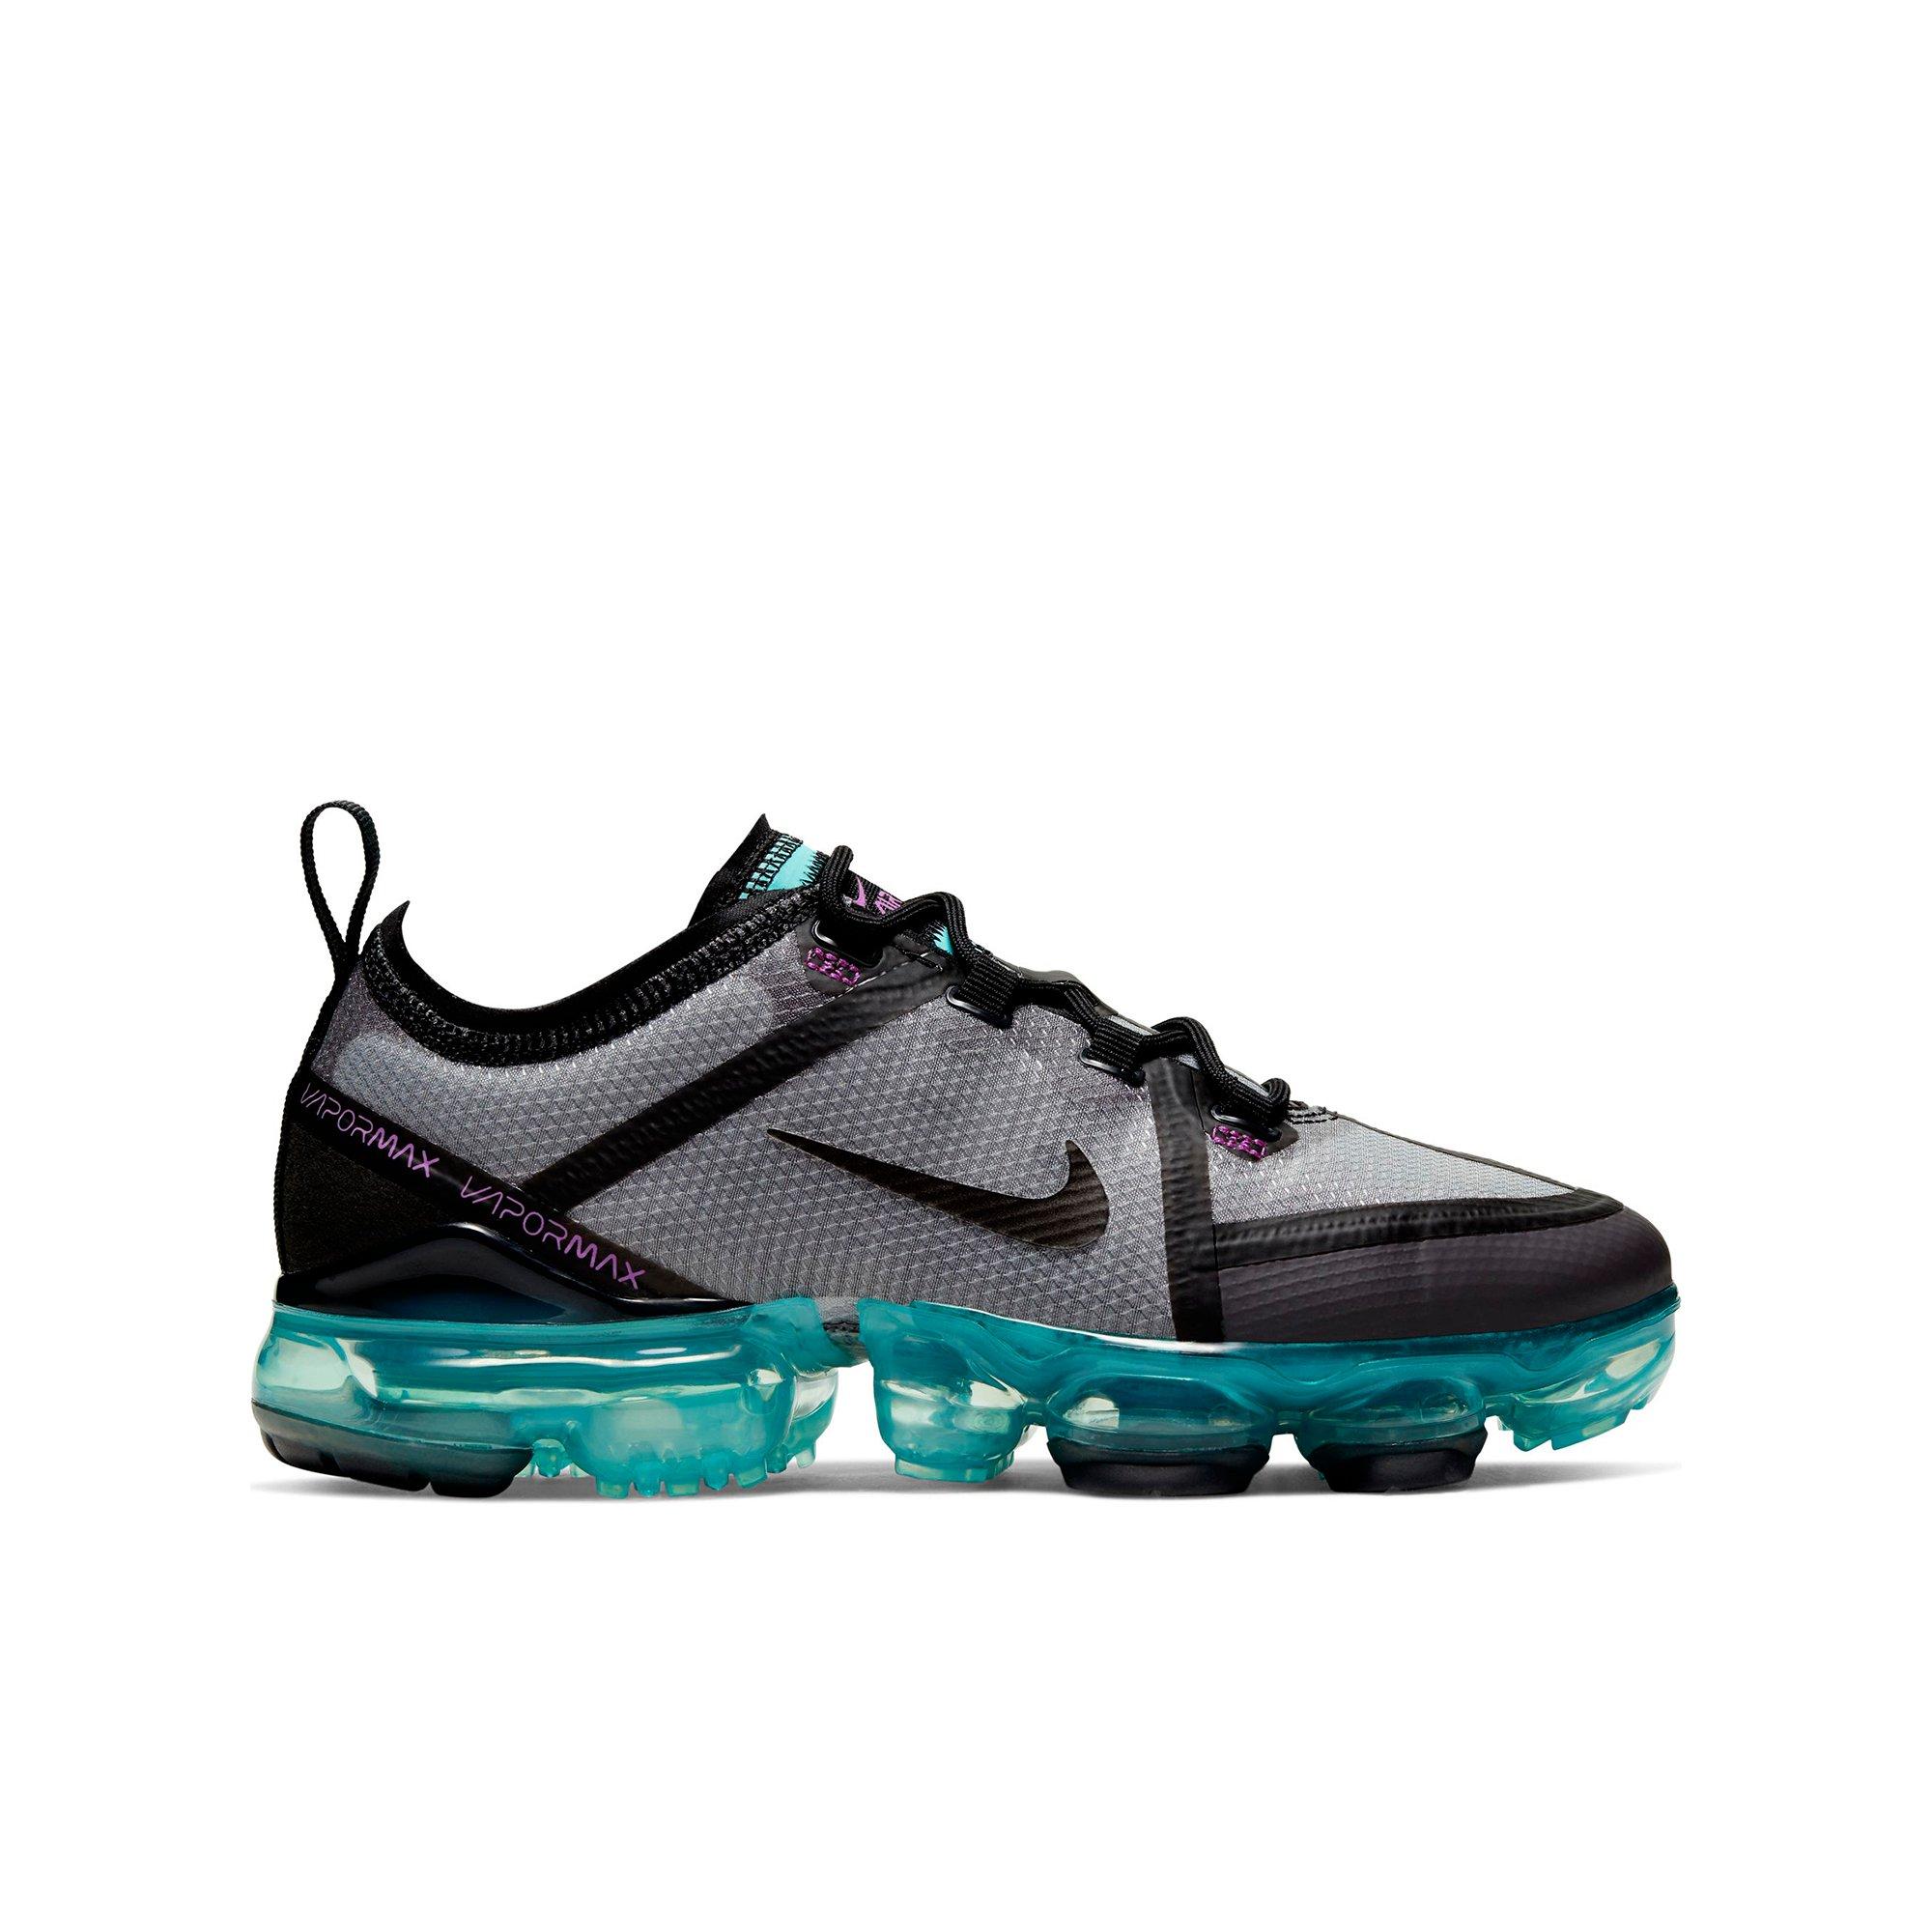 grey and turquoise vapormax